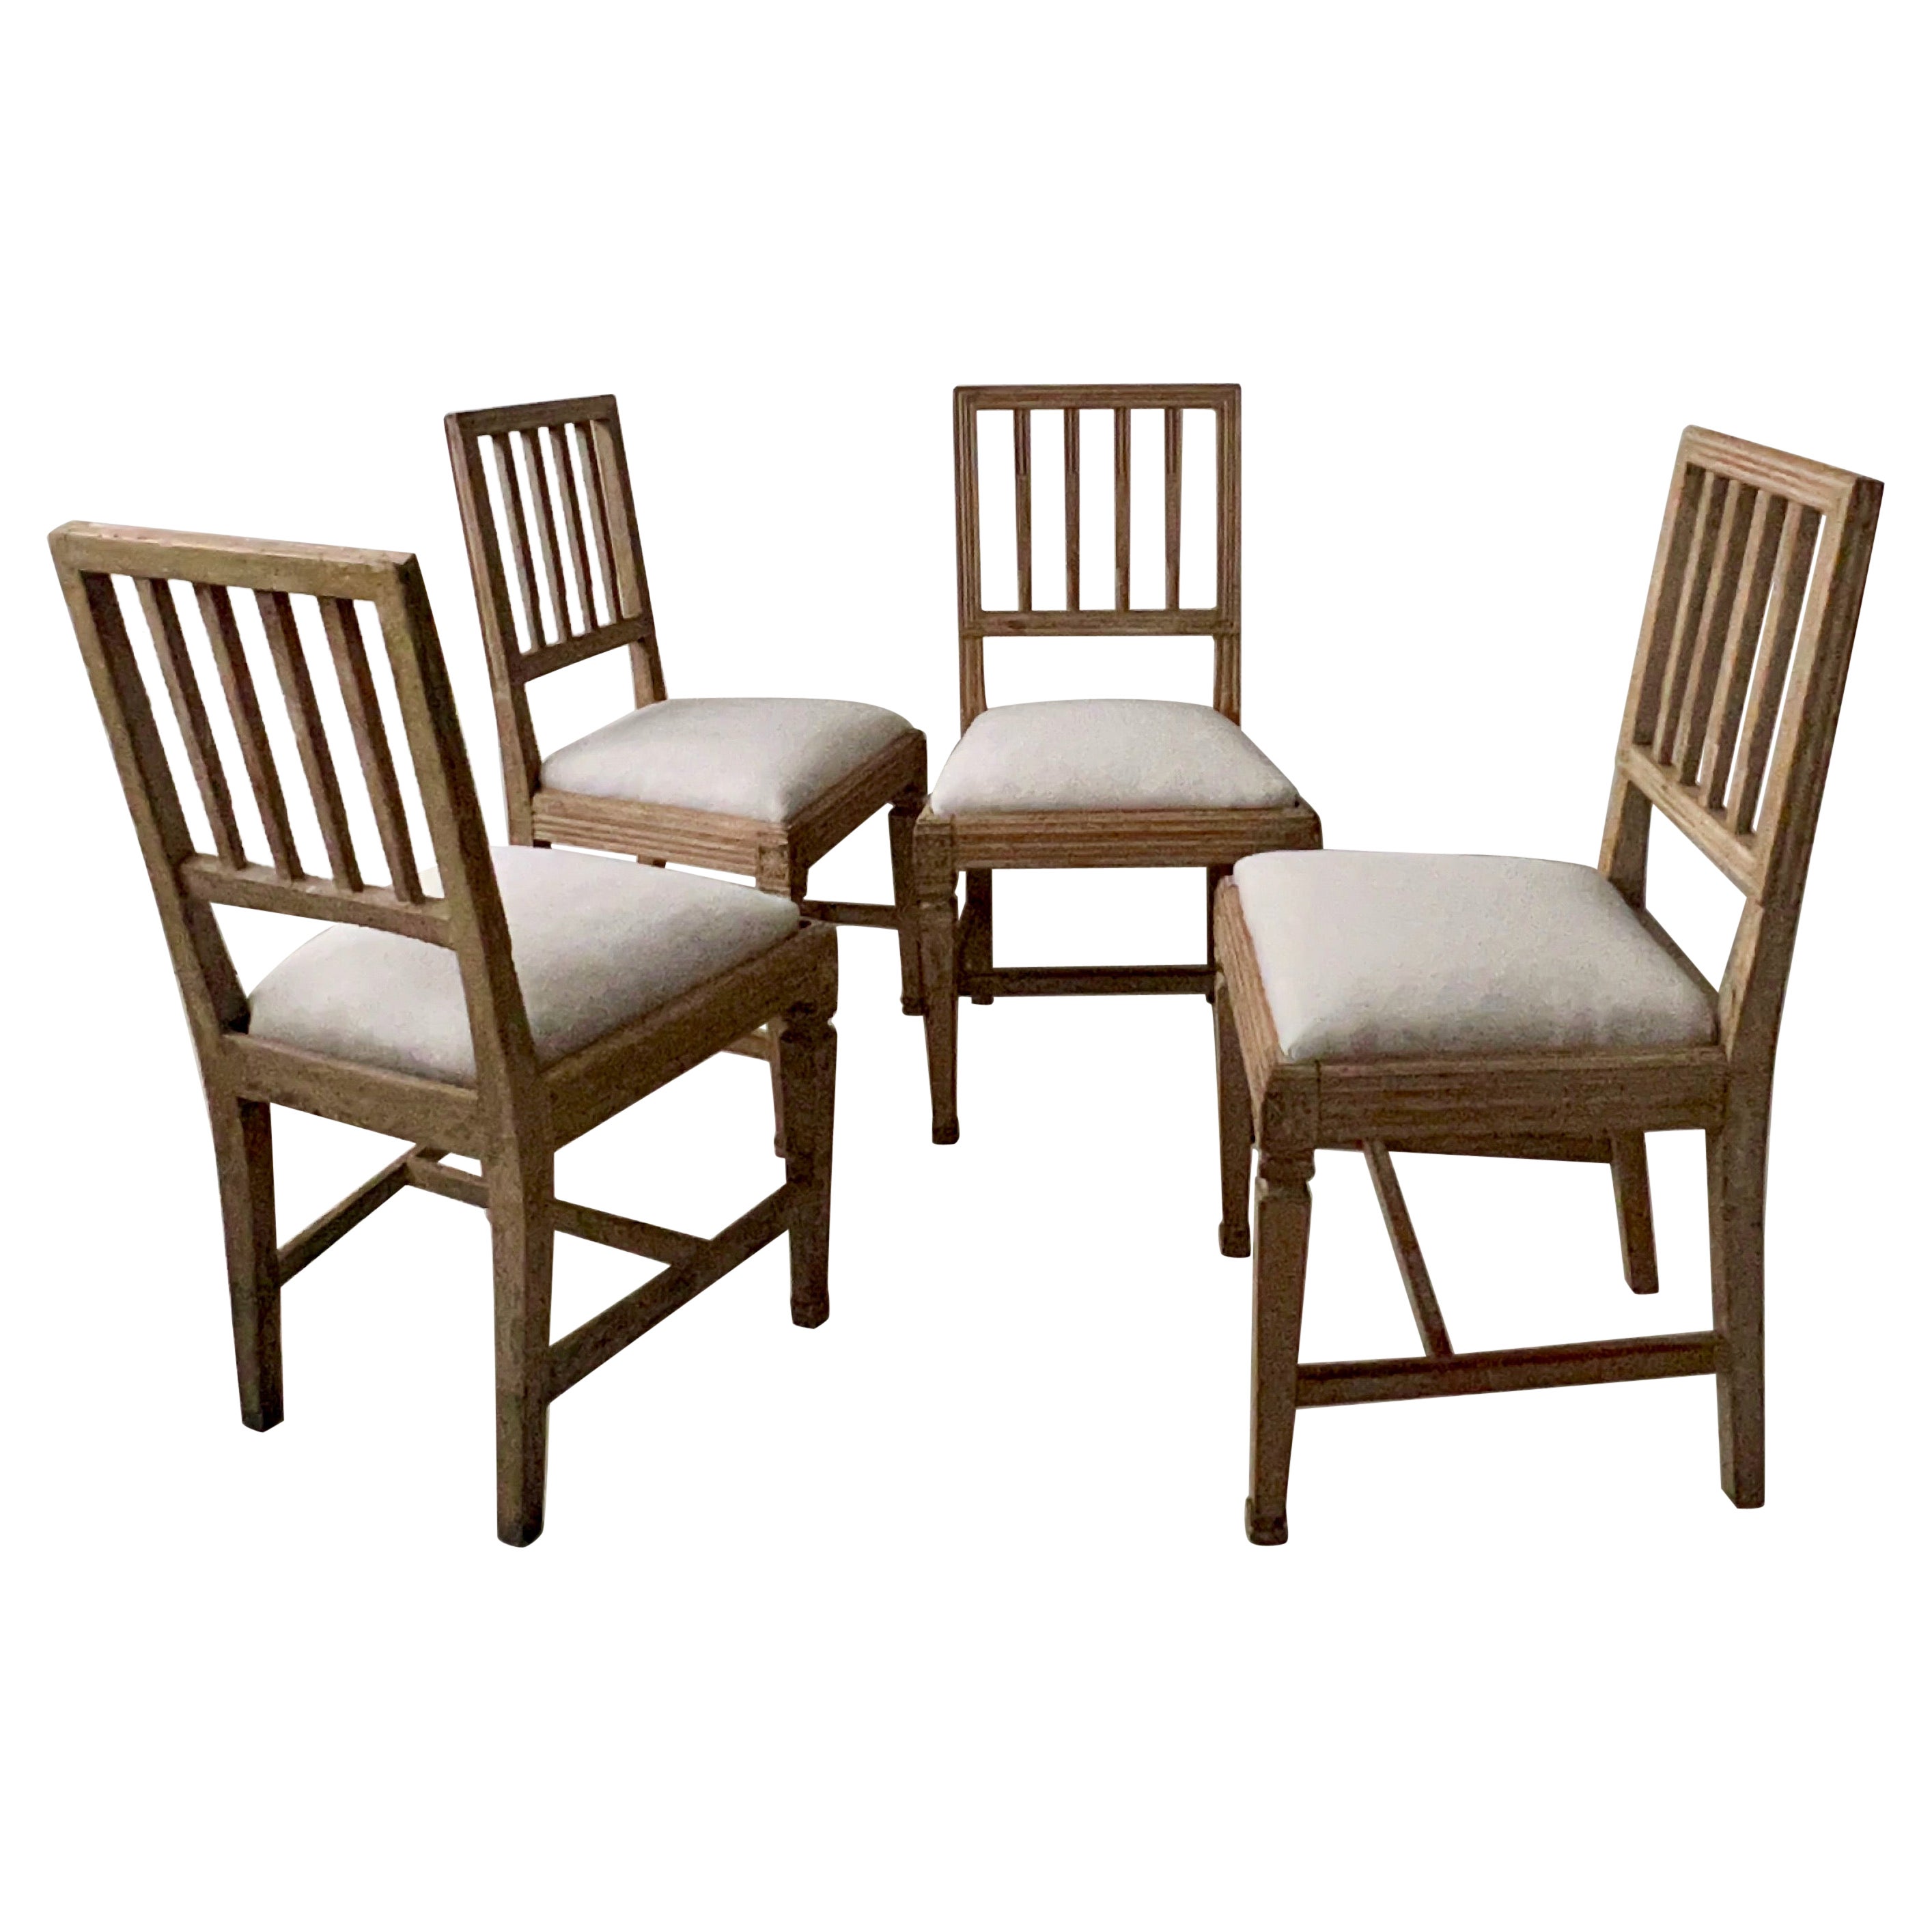 Set of Four 18th Century Gustavian Period Chairs For Sale